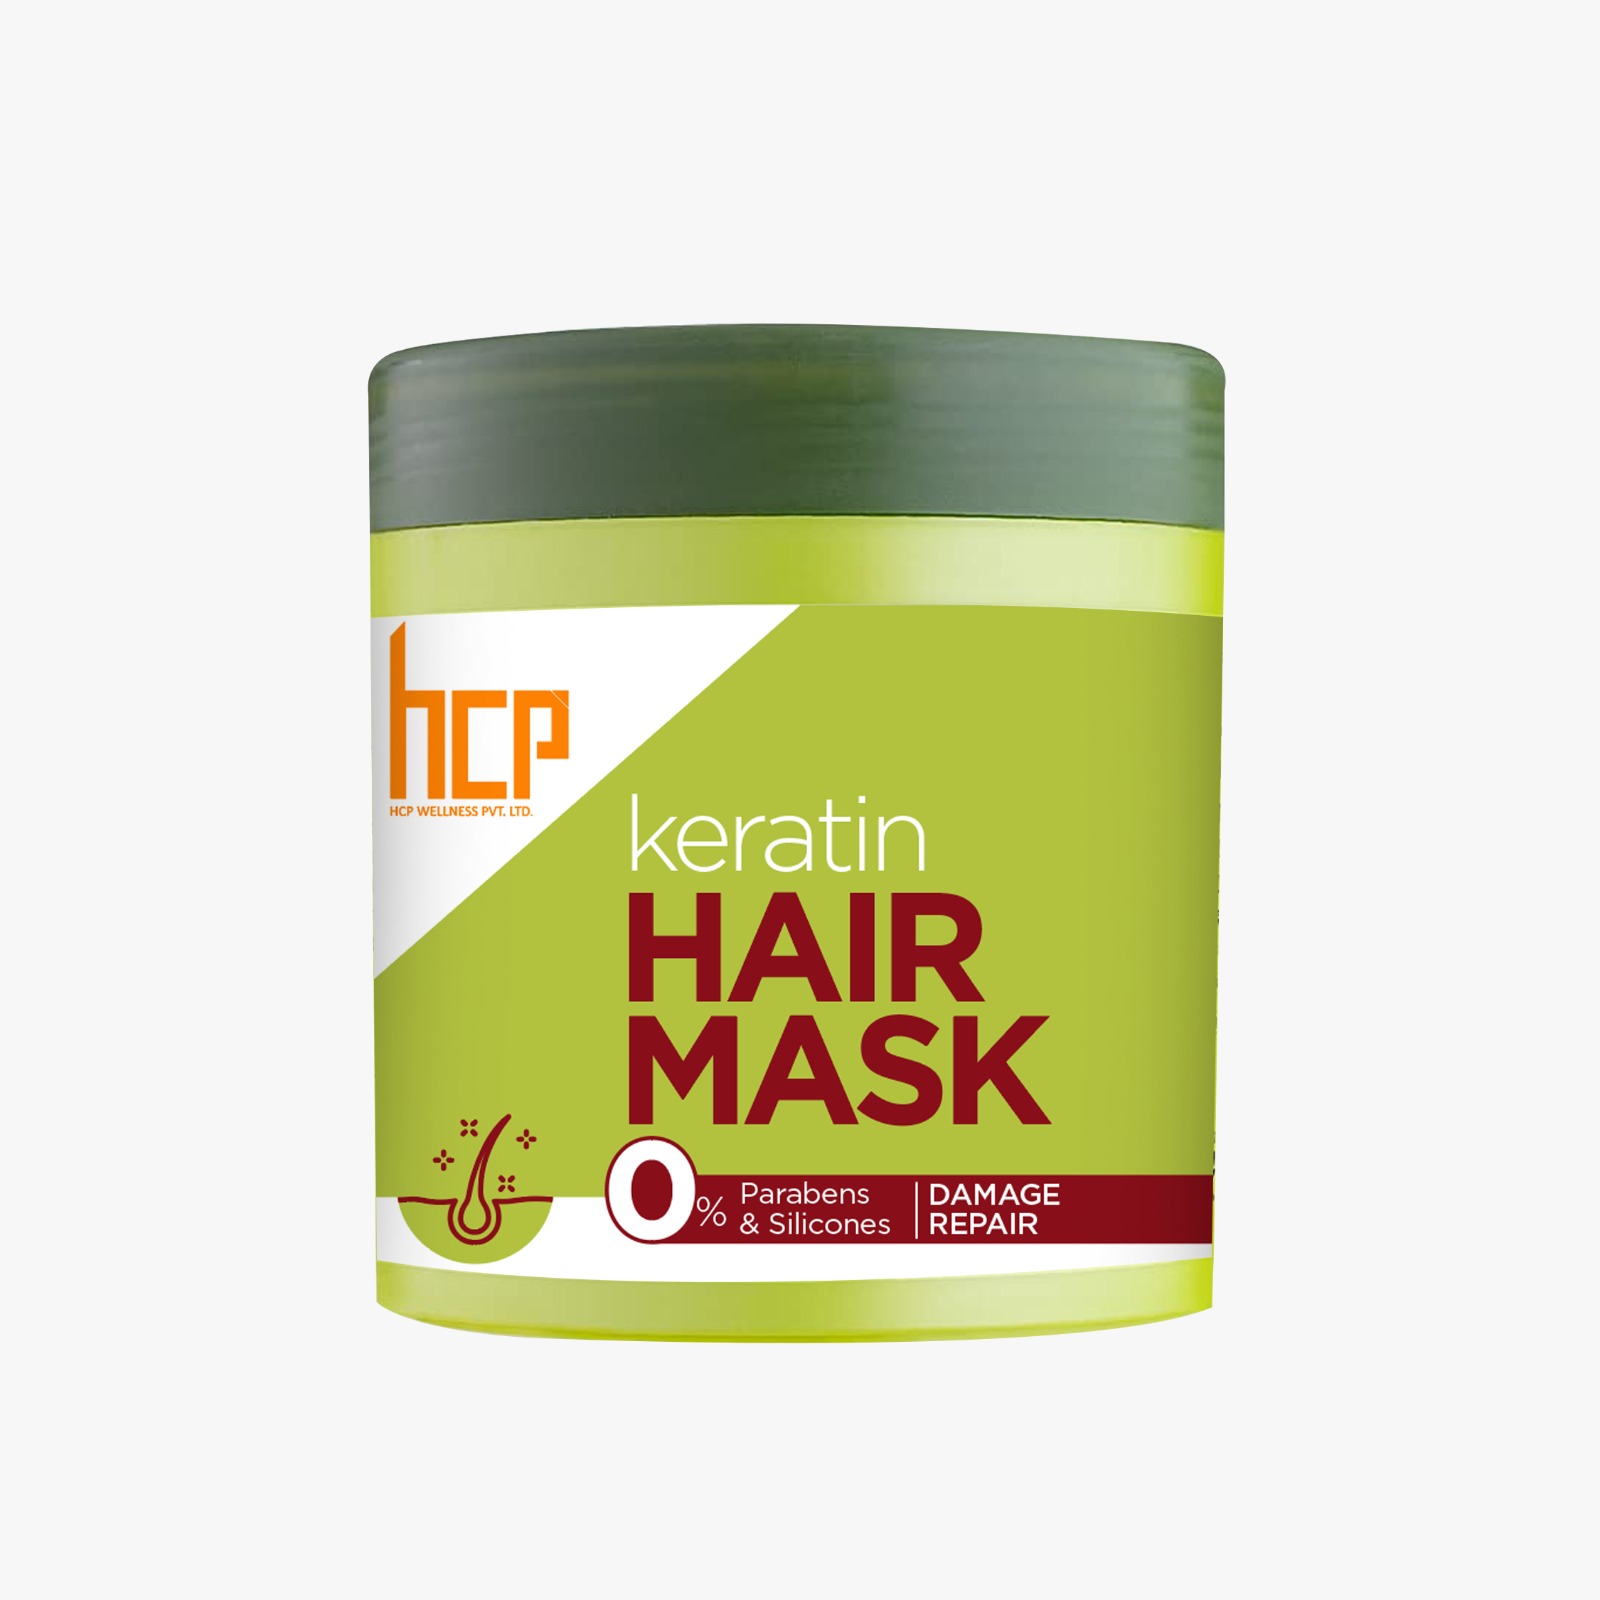 Premium Hair Mask Manufacturer in India offering Private Label and Third-Party Solutions for Tailored Hair Care Products